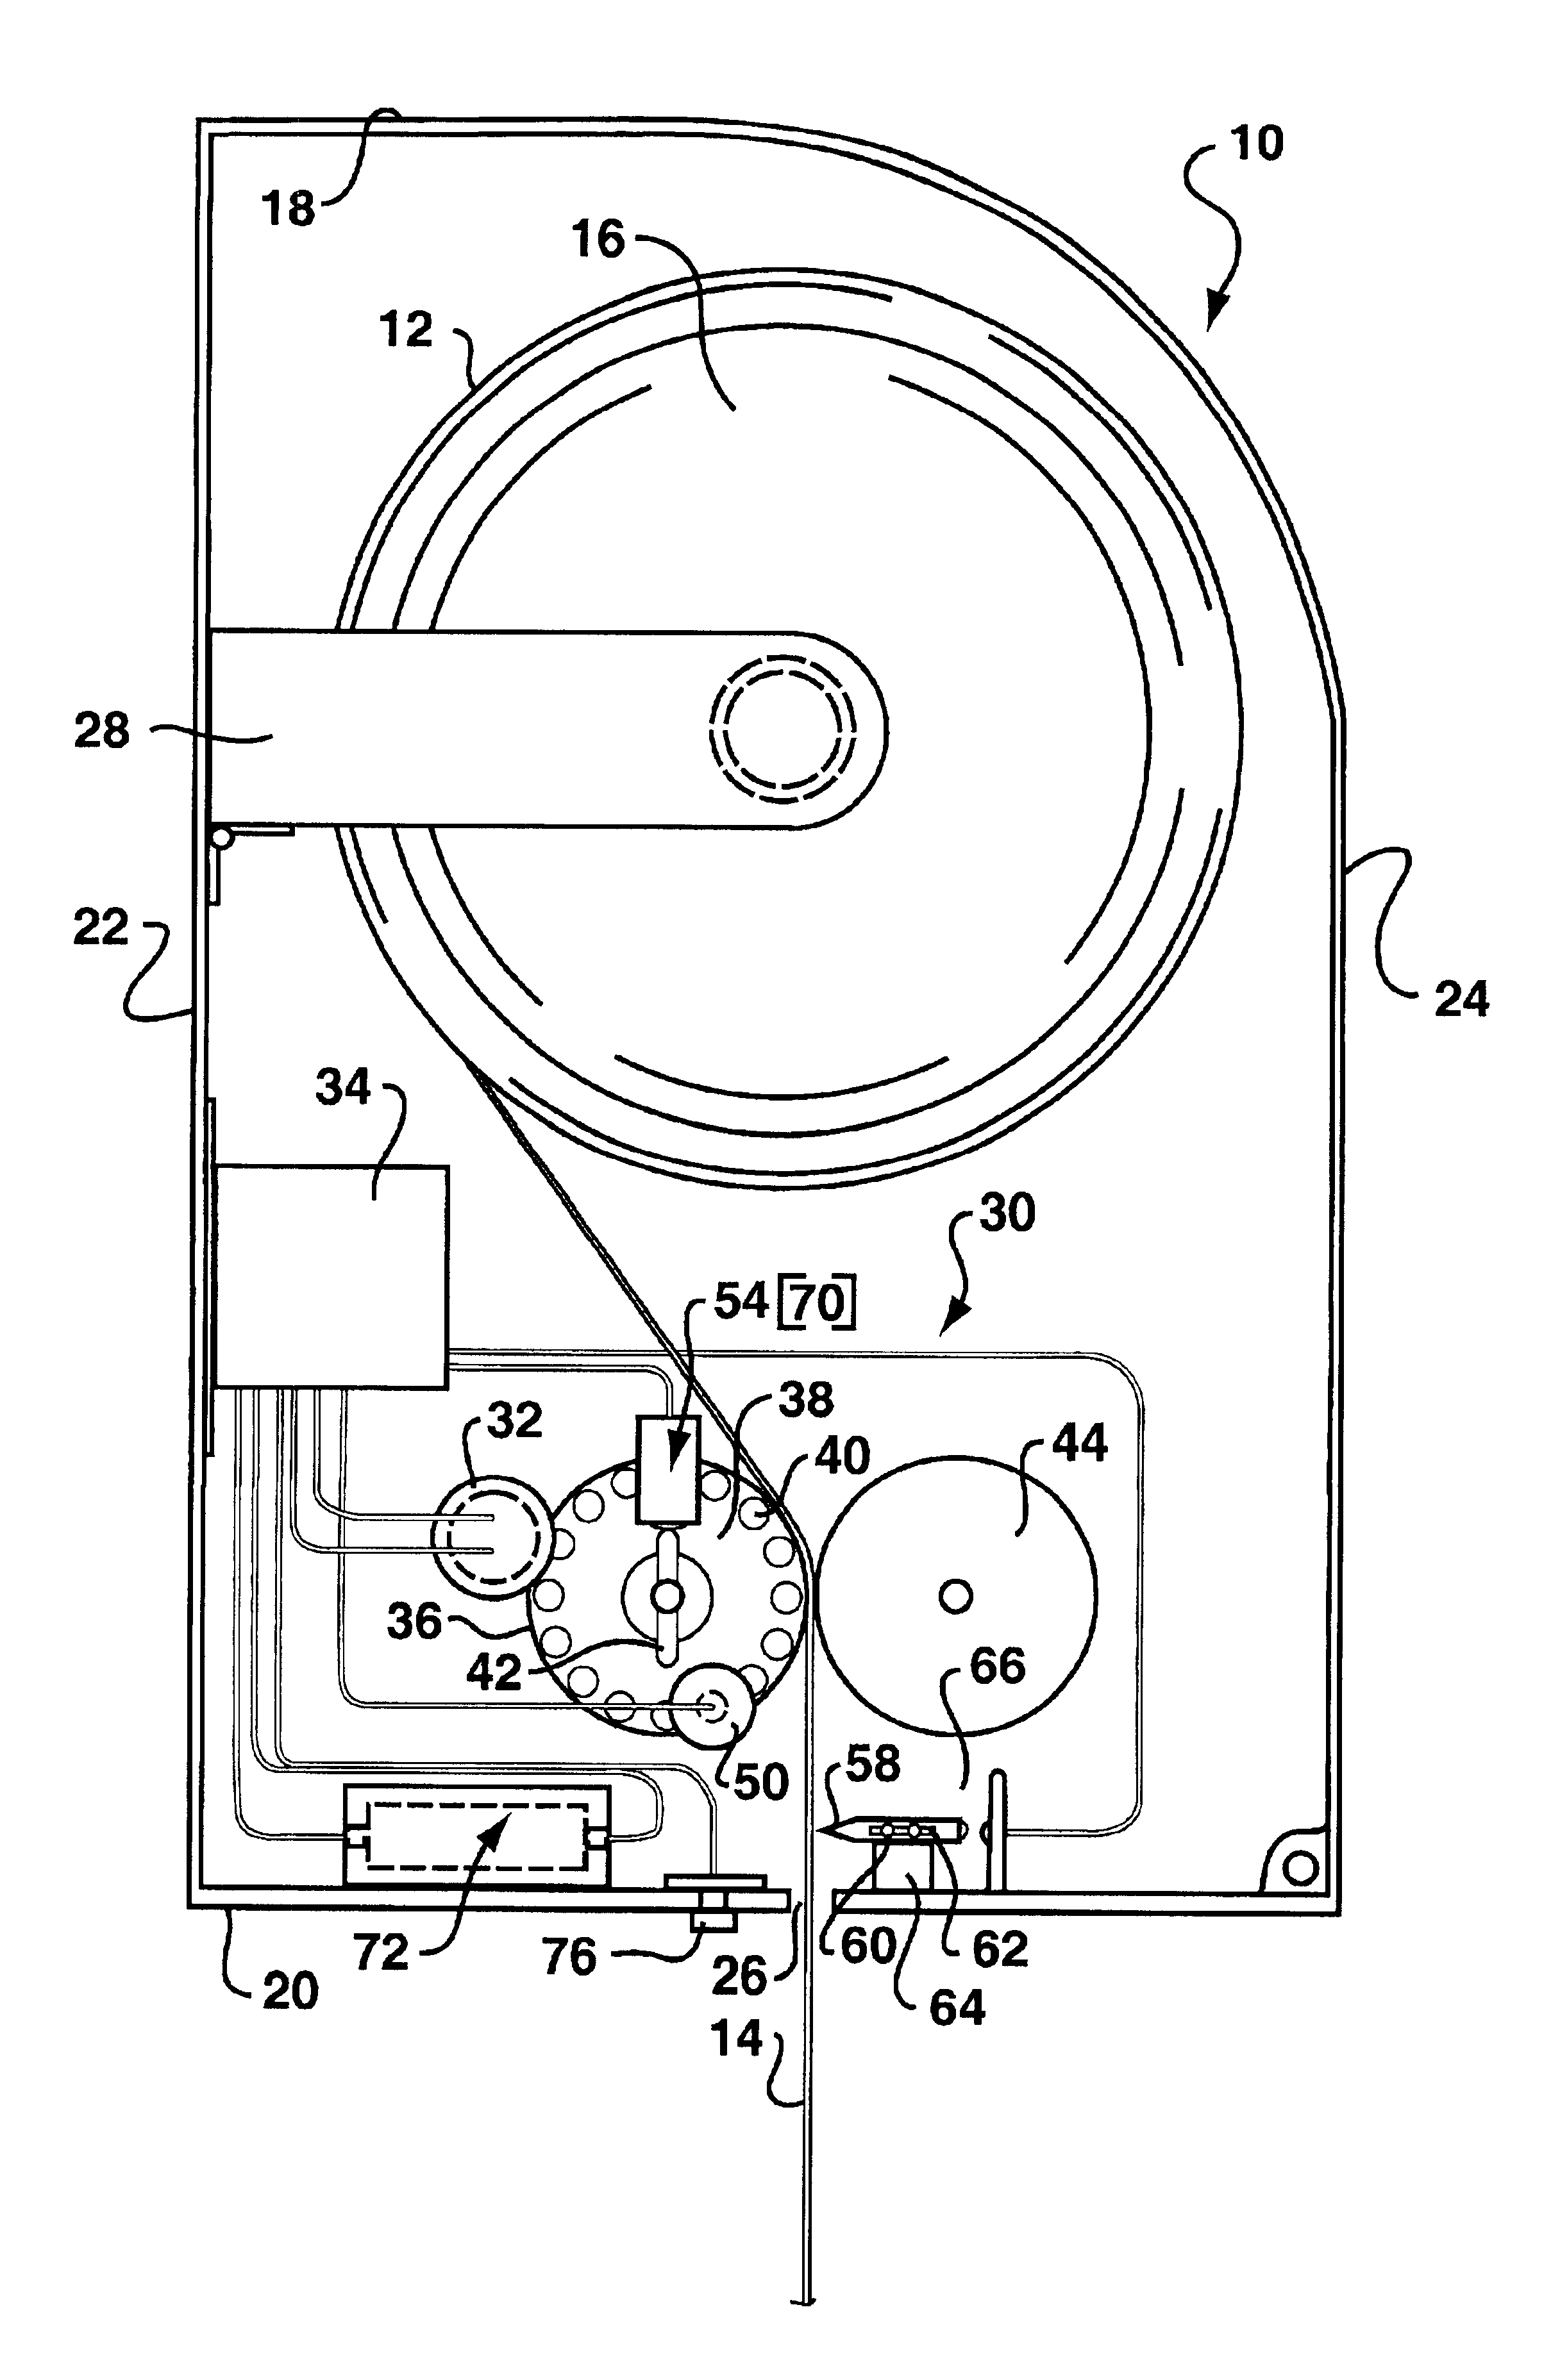 Electro-mechanical roll product dispenser